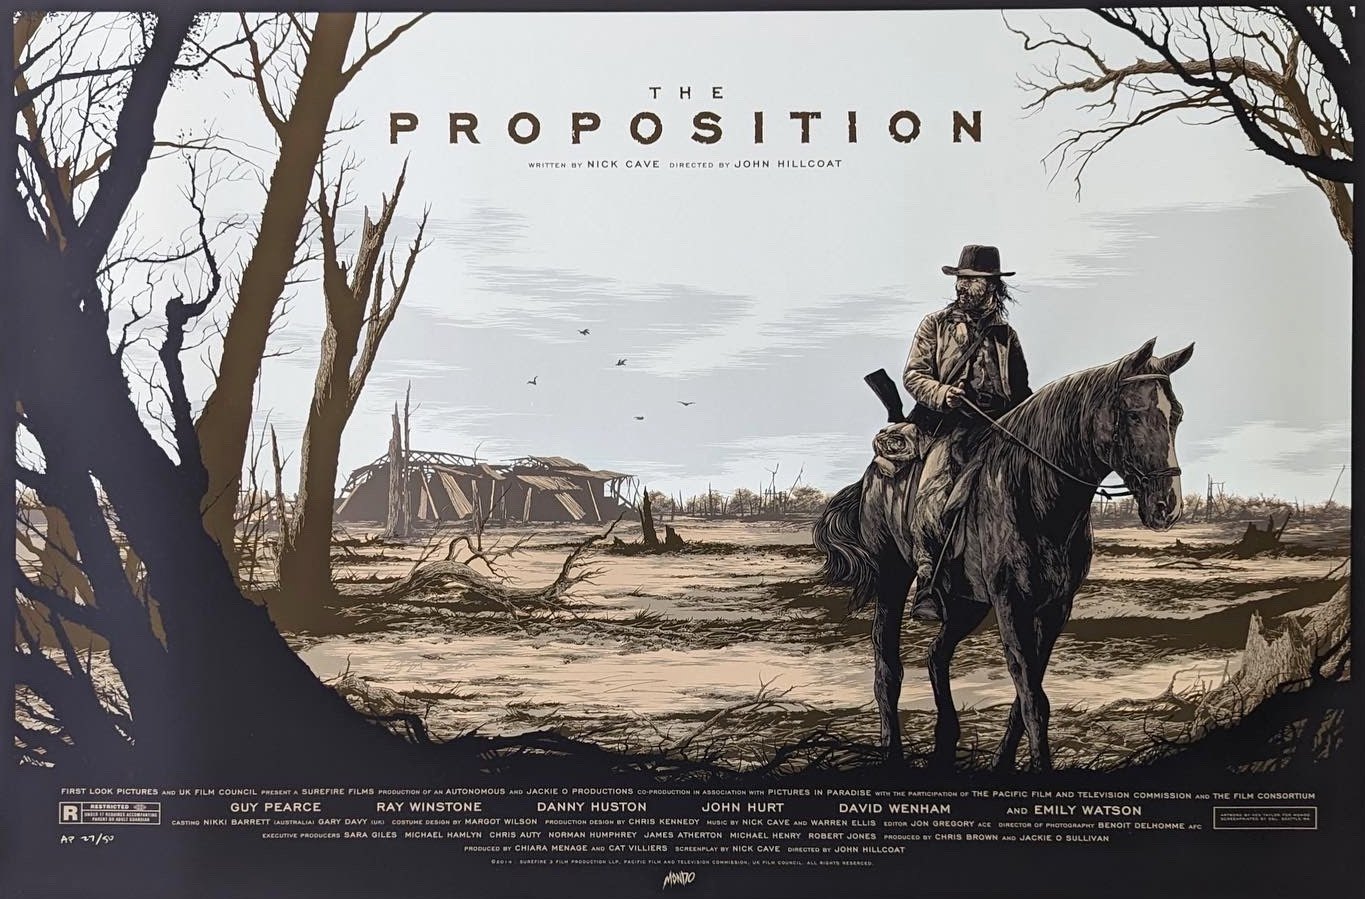 PROPOSITION, THE (regular) by Ken Taylor – RARE PRINTS AND POSTERS